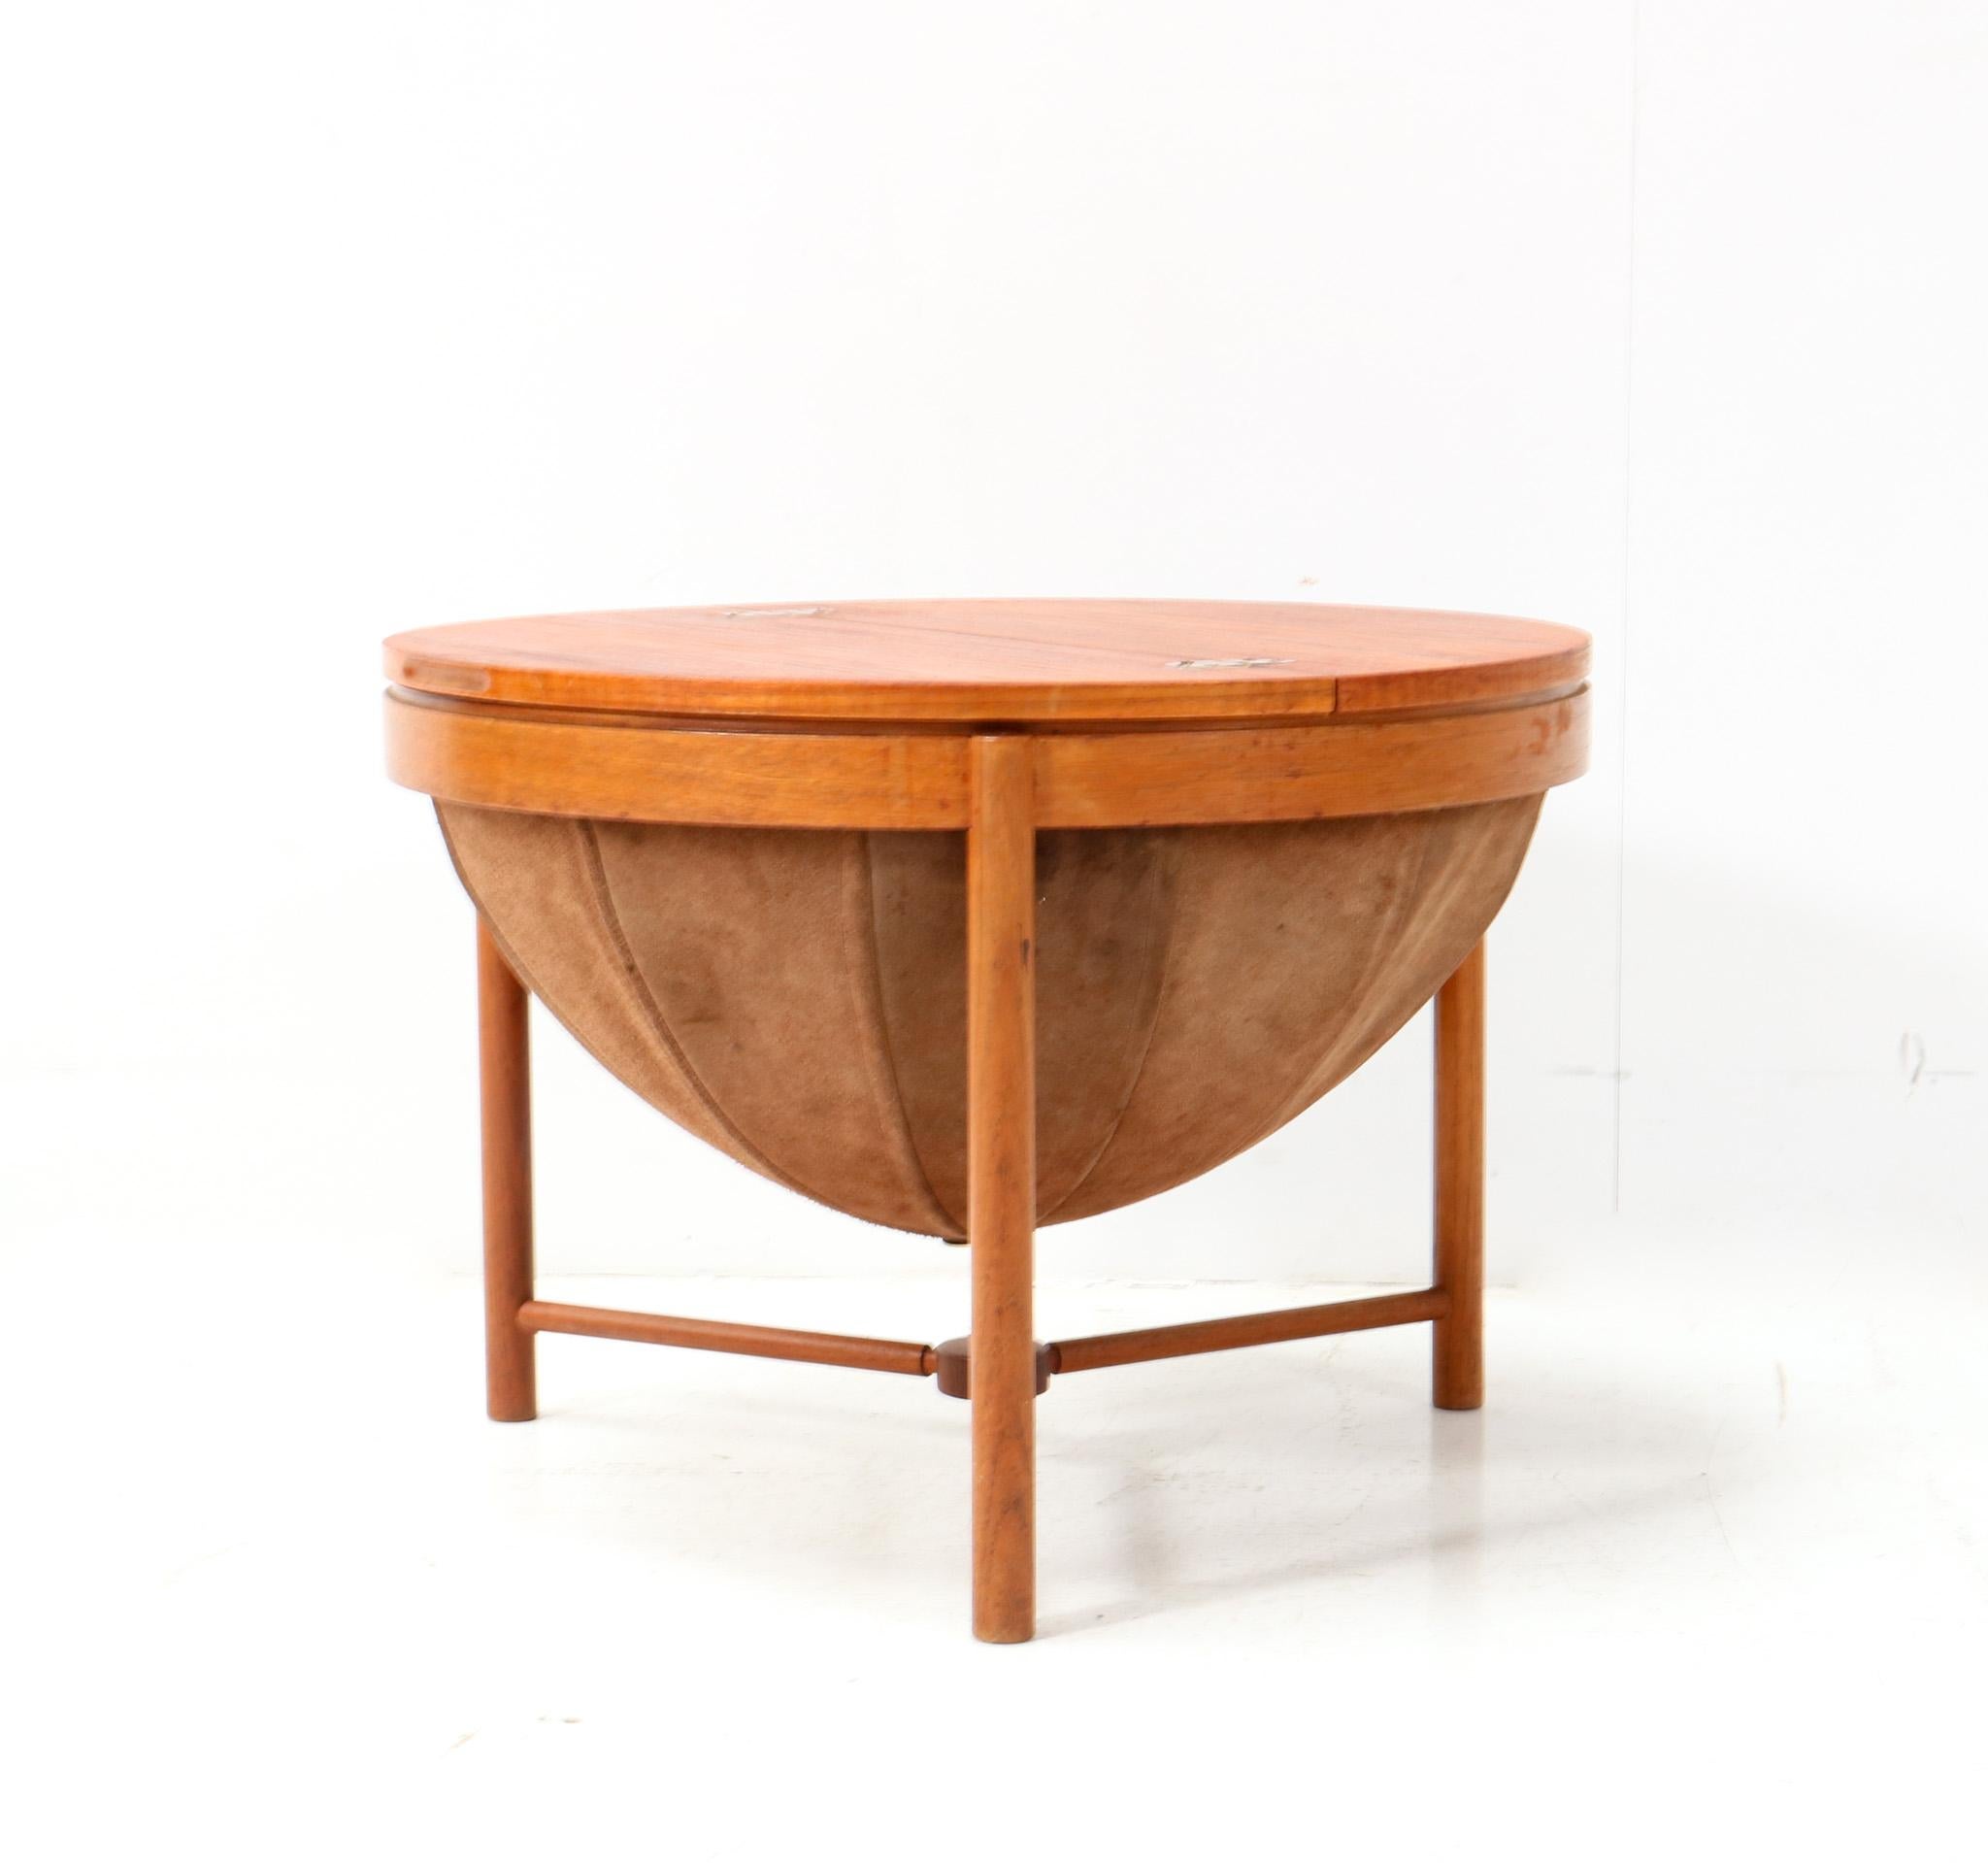 Stunning and elegant Mid-Century Modern sewing table or side table.
Design by Rolf Rastad and Adolf Relling for Rasmus Solberg.
Striking Norwegian design from the 1960s.
Solid teak base with original solid teak top.
Original leather basket and